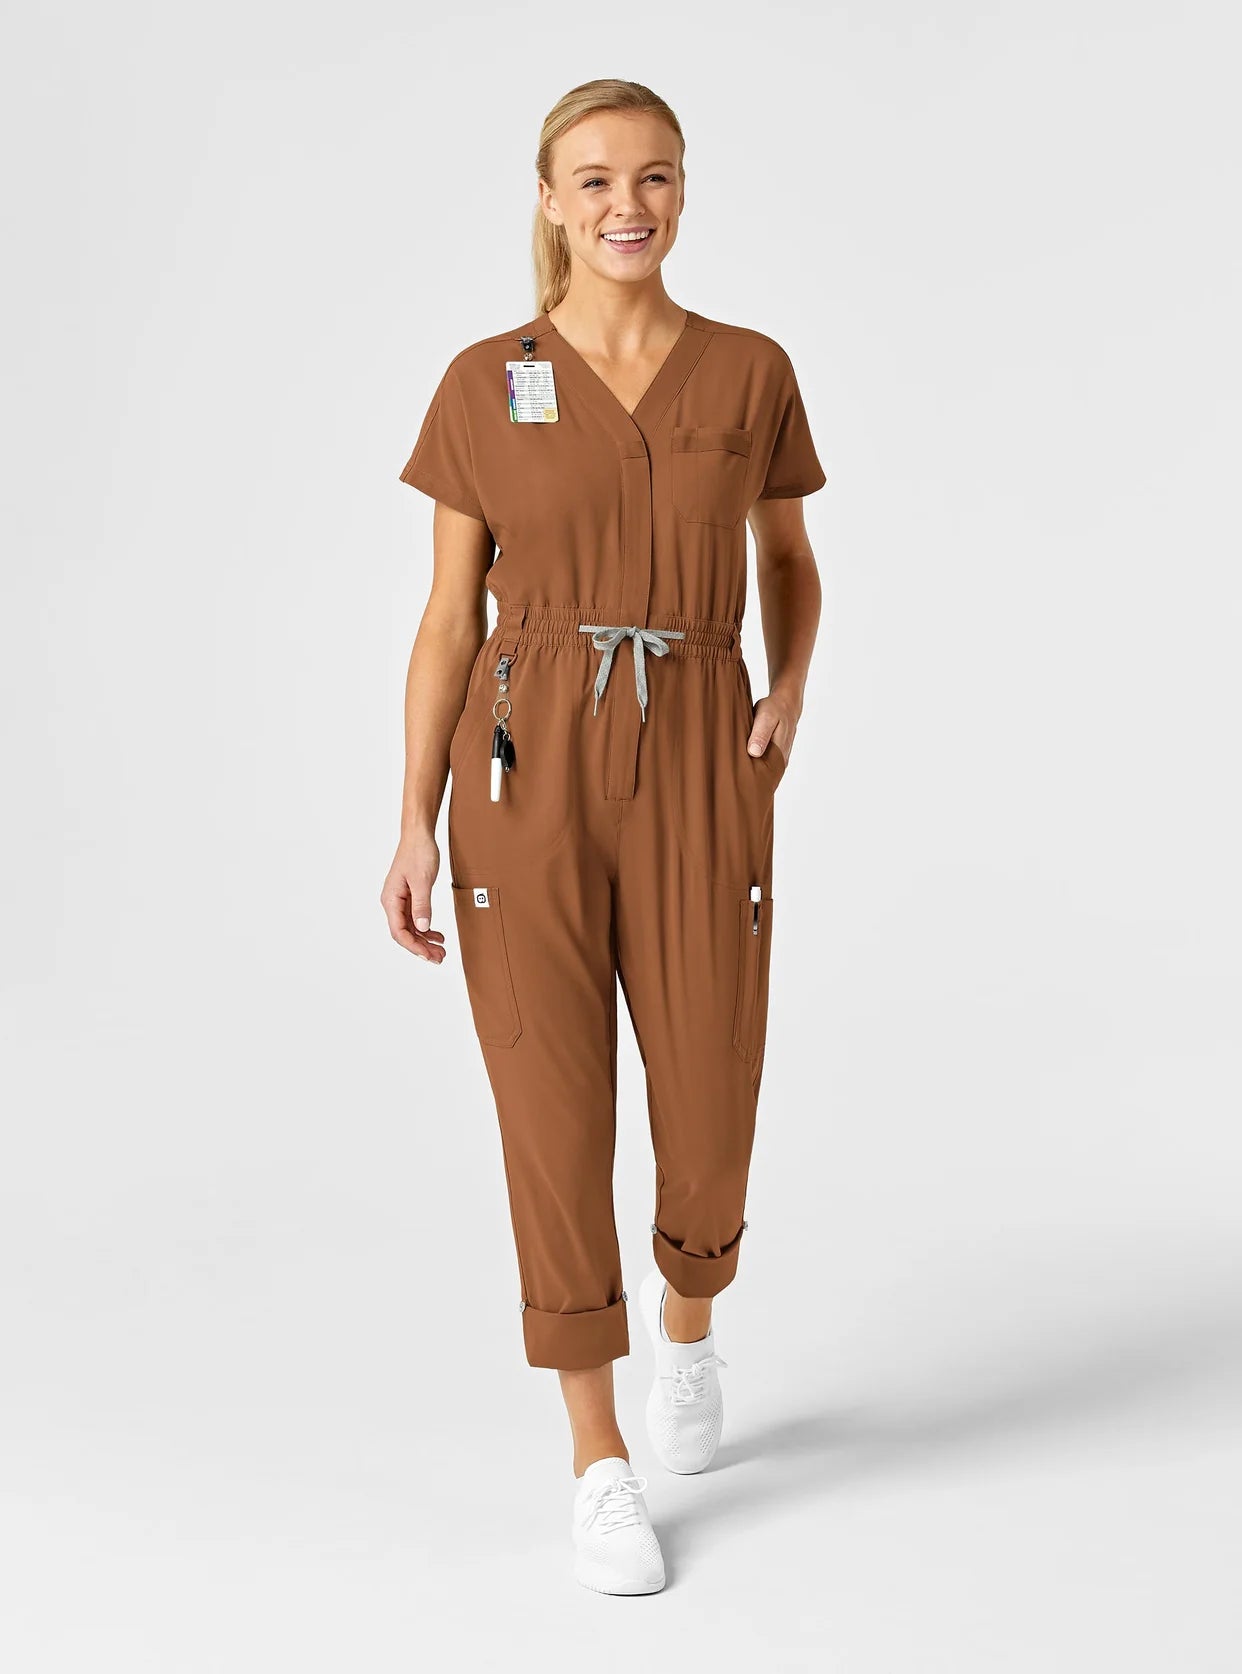 Wonderwink Renew 9-Pocket Zip Front Women's Scrub Jumpsuit, Olive, Jumpsuits  Scrubs Pants From Scrubs And Beyond